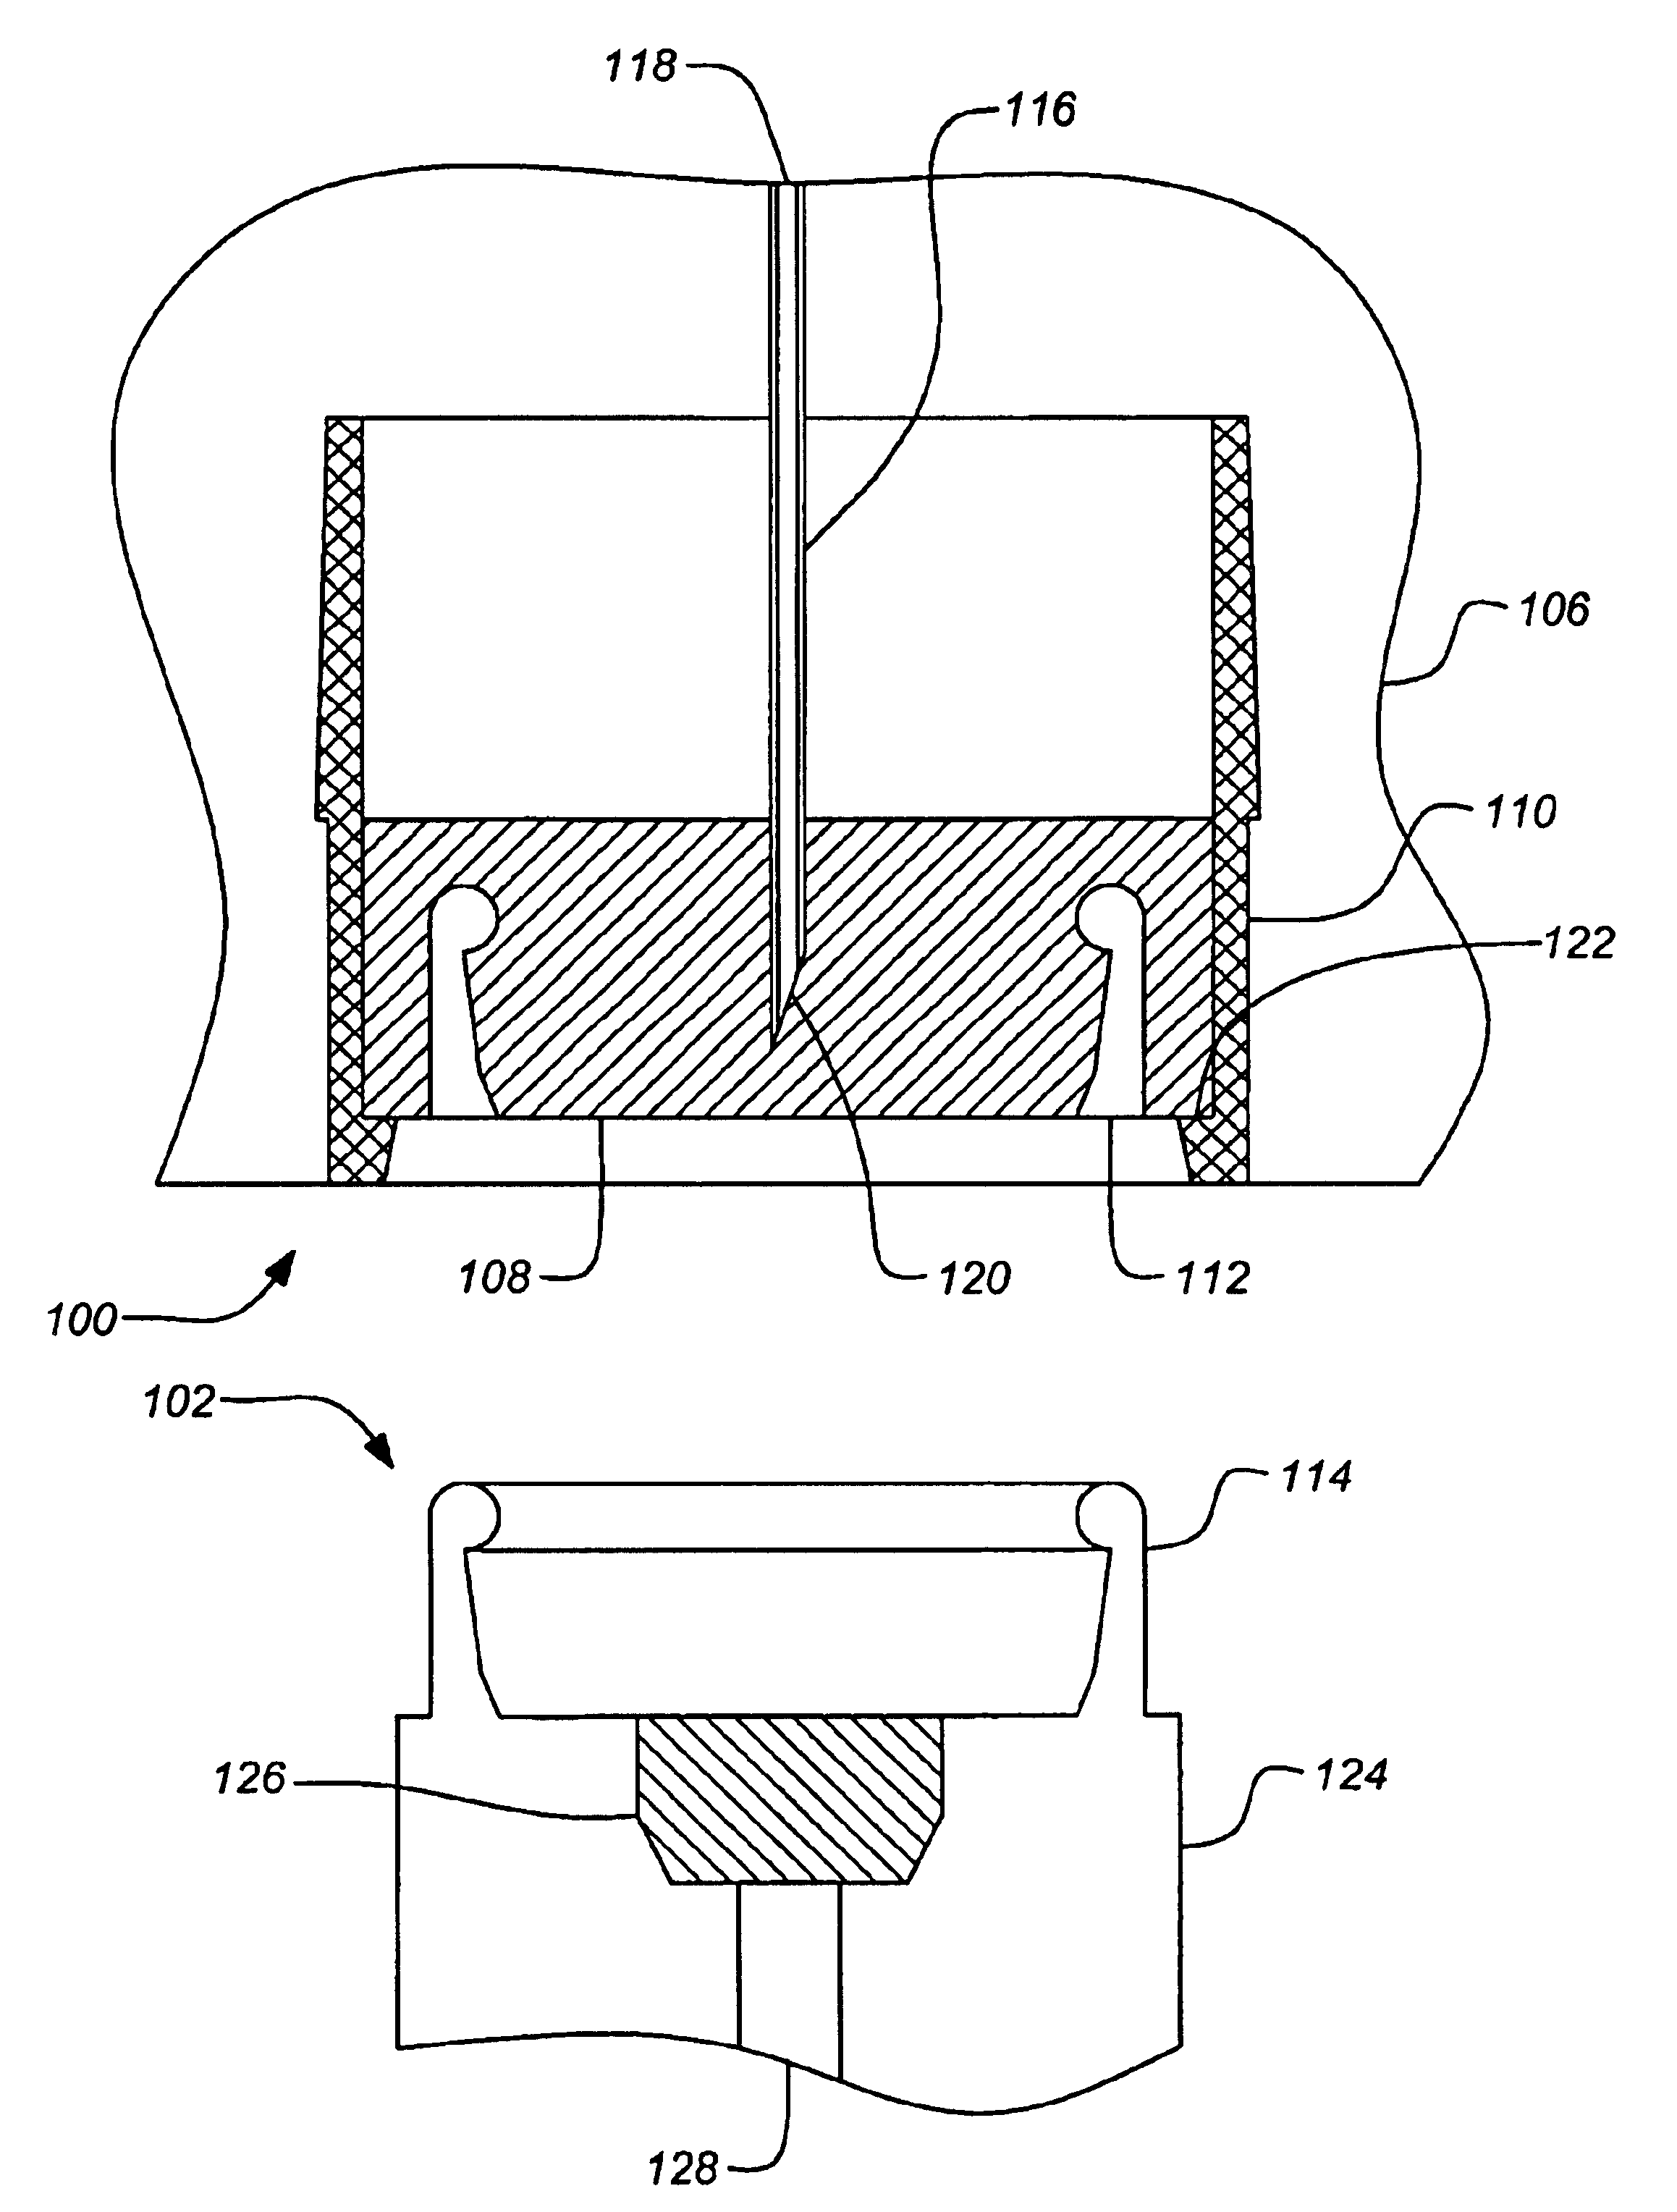 Self sealing disconnect device